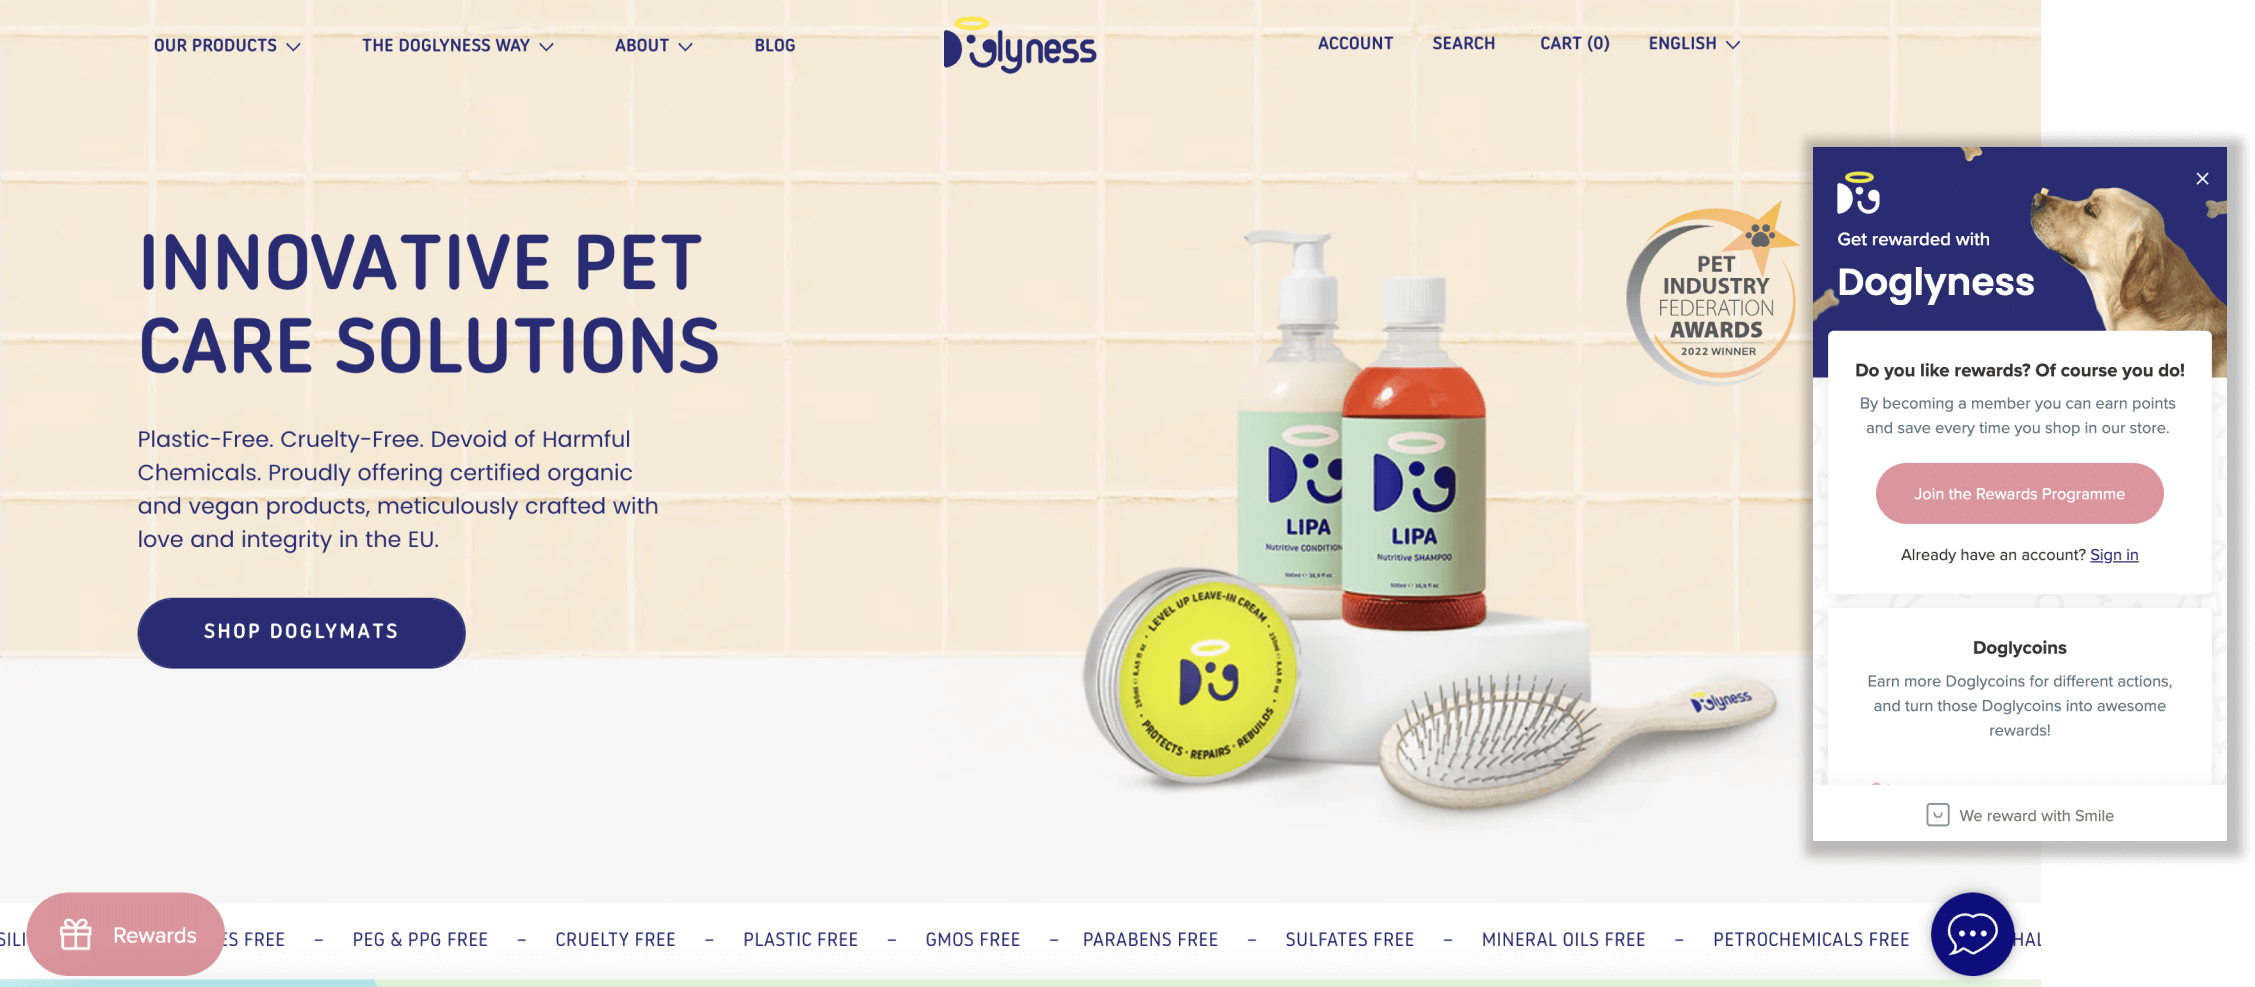 A screenshot from Dogylness’ homepage showing images of its products. There is also a screenshot of its rewards program panel where customers can earn Doglycoins. 